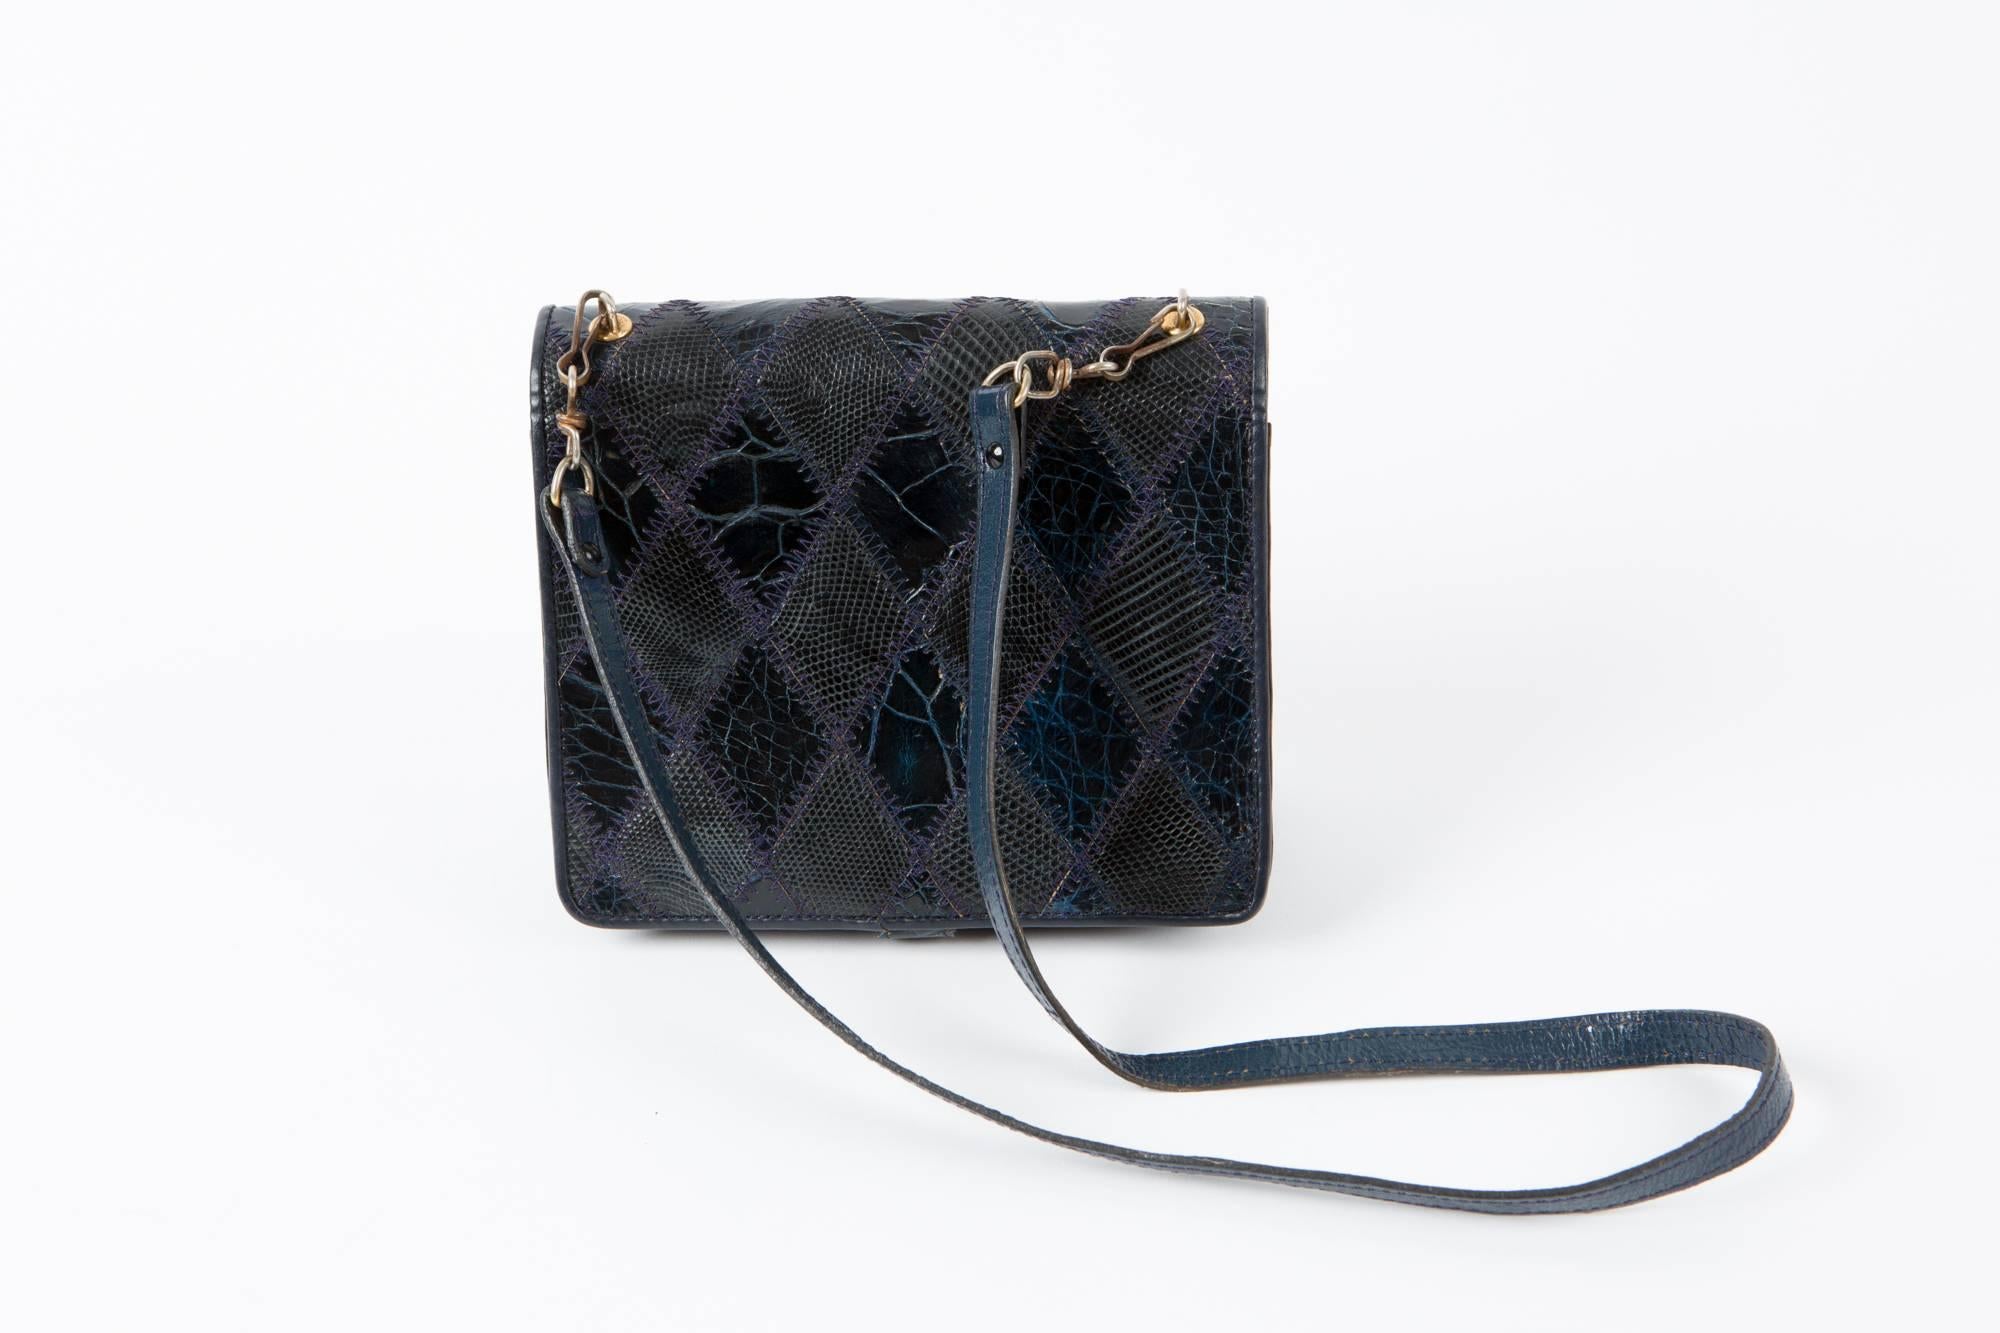 1970s navy leather patches clutch featuring  different leather & reptile leather effects, four compartments, gold tone metallic opening, a detachable 
shoulder strap (31,1in. (79cm)).
6,7 in. (17cm) X 5.9in. (15cm) X 1.18in. (3cm) 
In excellent